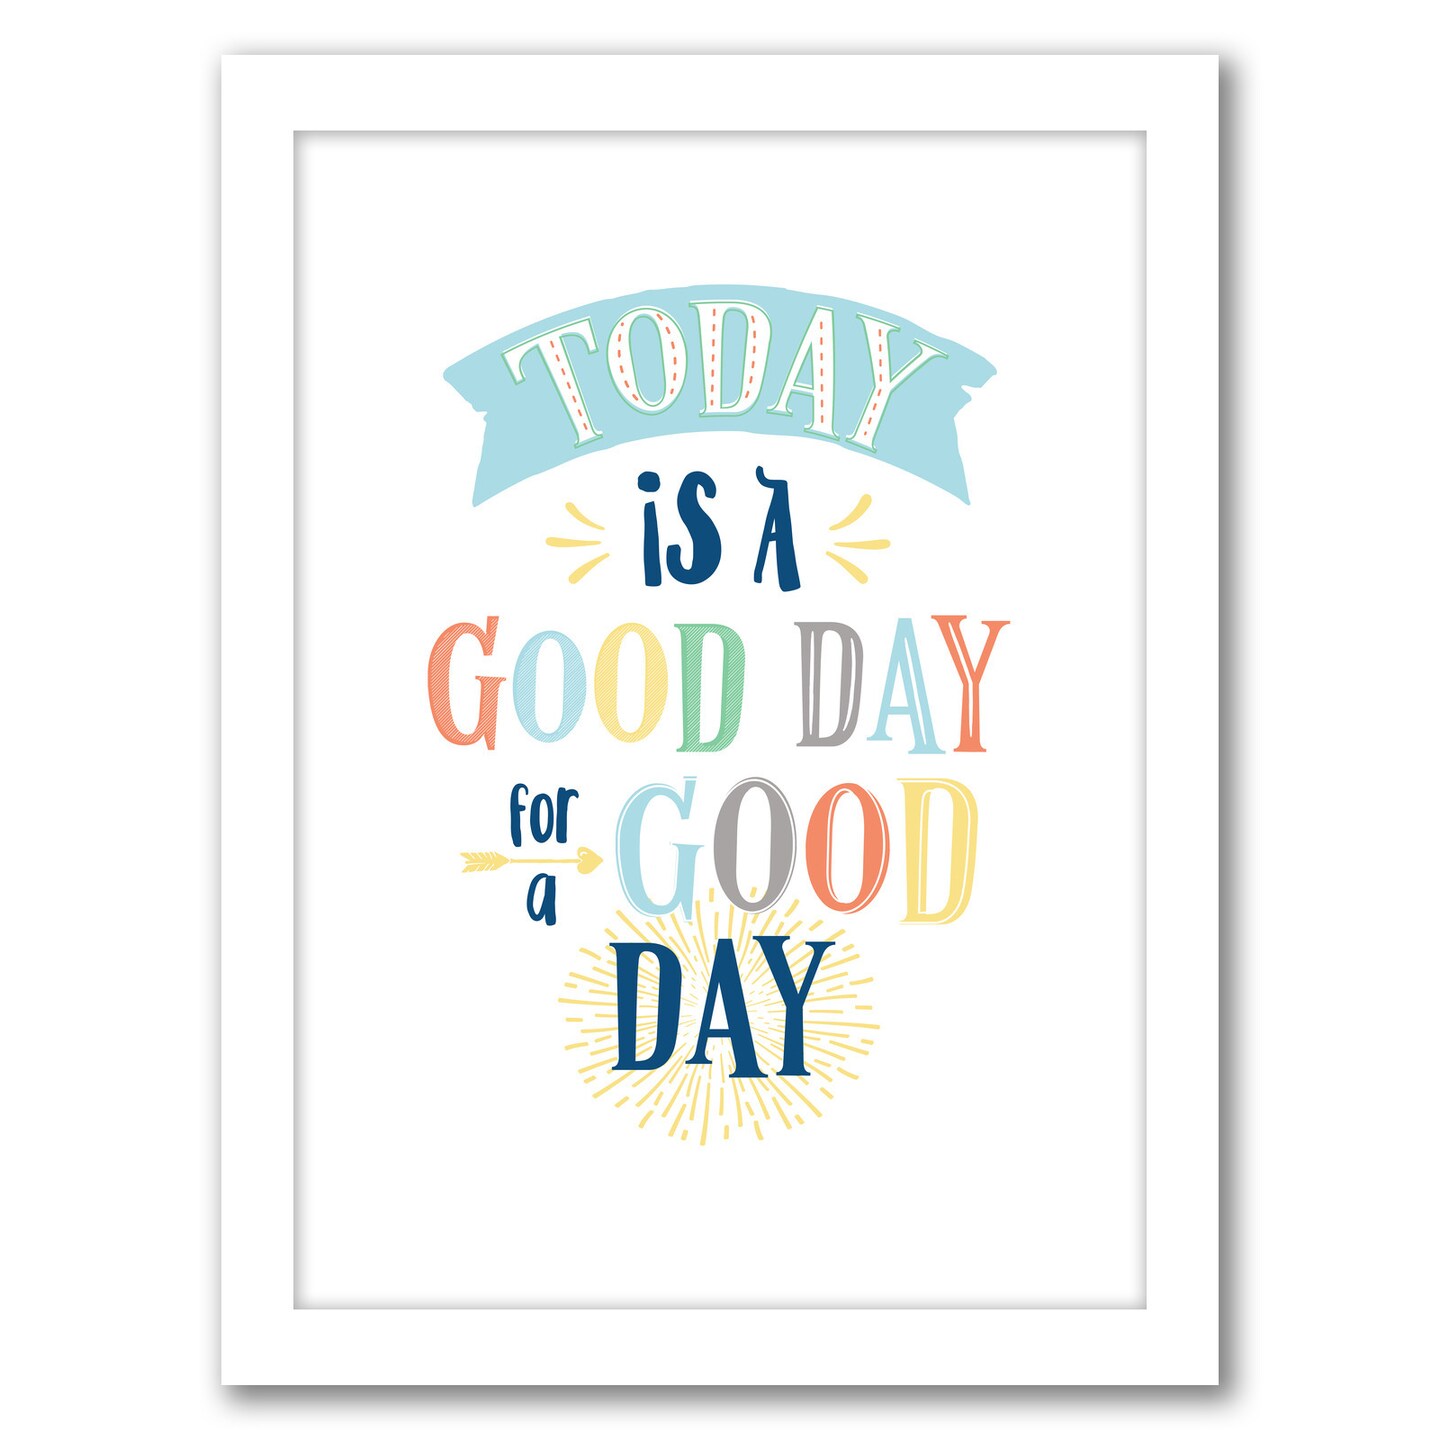 Today Is A Good Day by Elena David Frame  - Americanflat